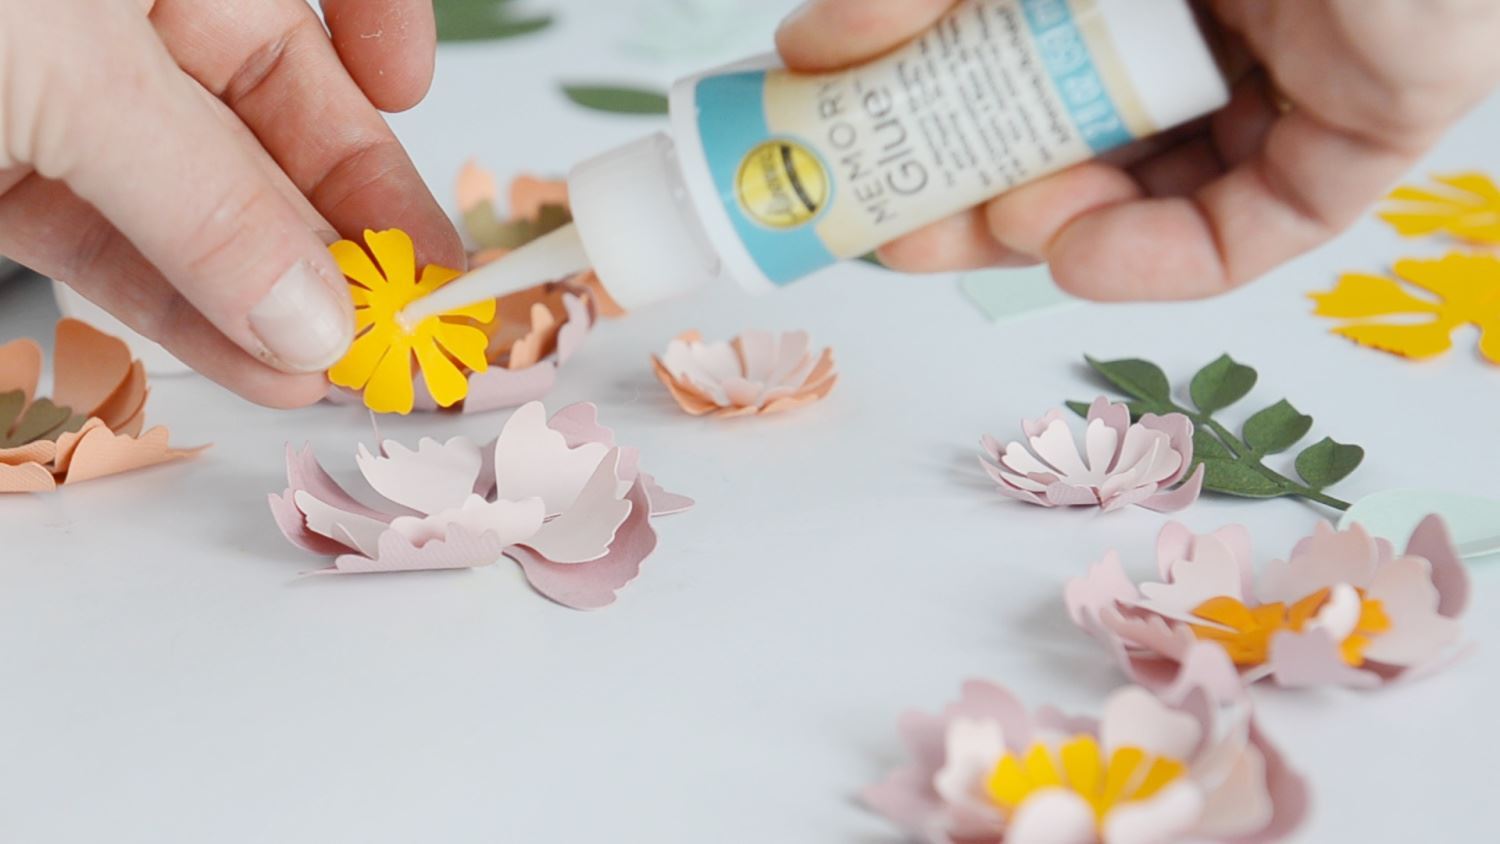 Begin gluing layers of flowers together